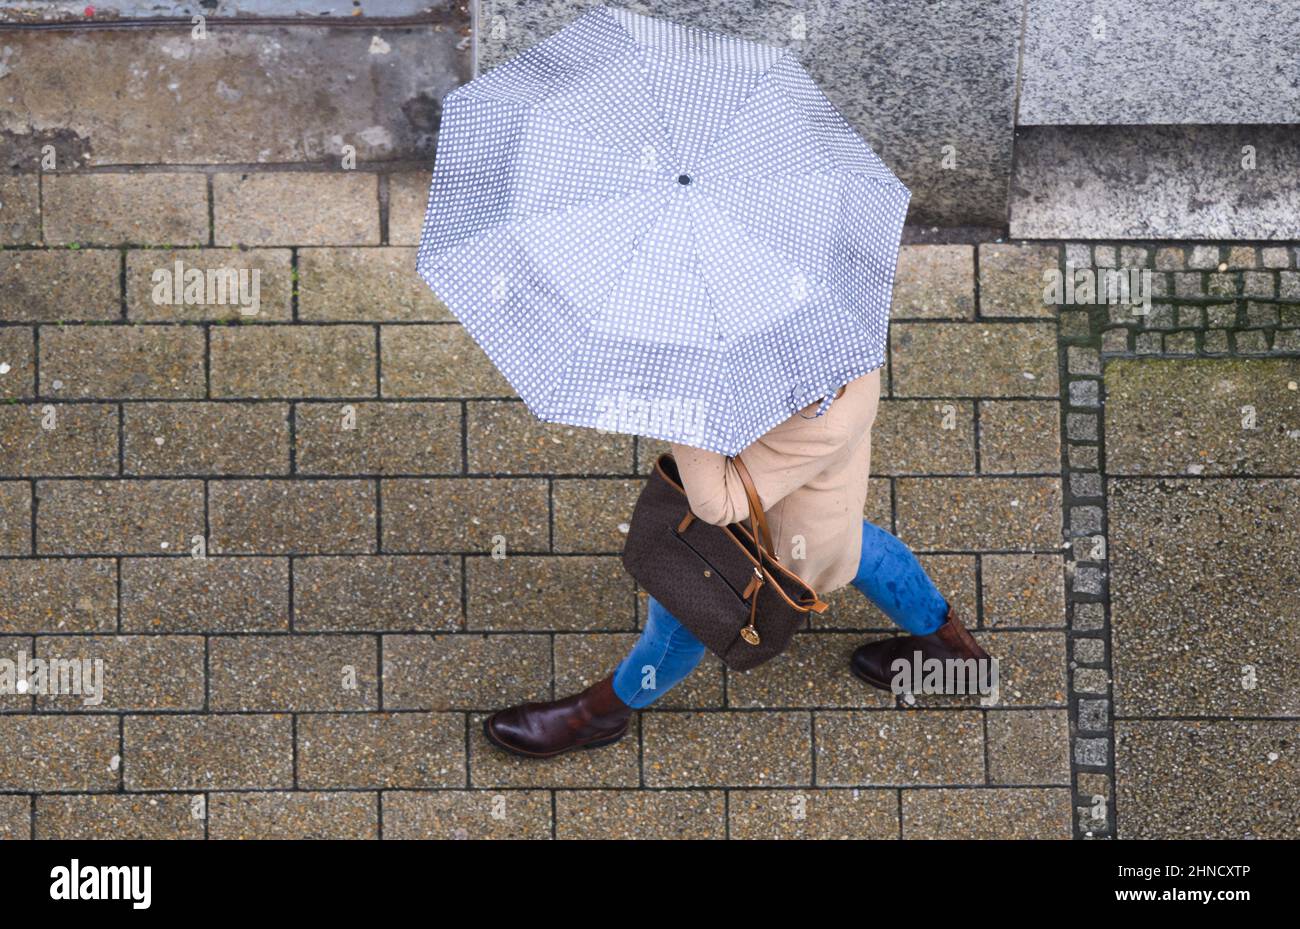 Hildesheim, Germany. 16th Feb, 2022. A woman walks through the city center with an umbrella. A powerful low-pressure system with gale-force winds of force 12 will pass over Lower Saxony and Bremen starting Thursday night, according to meteorologists. Credit: Julian Stratenschulte/dpa/Alamy Live News Stock Photo